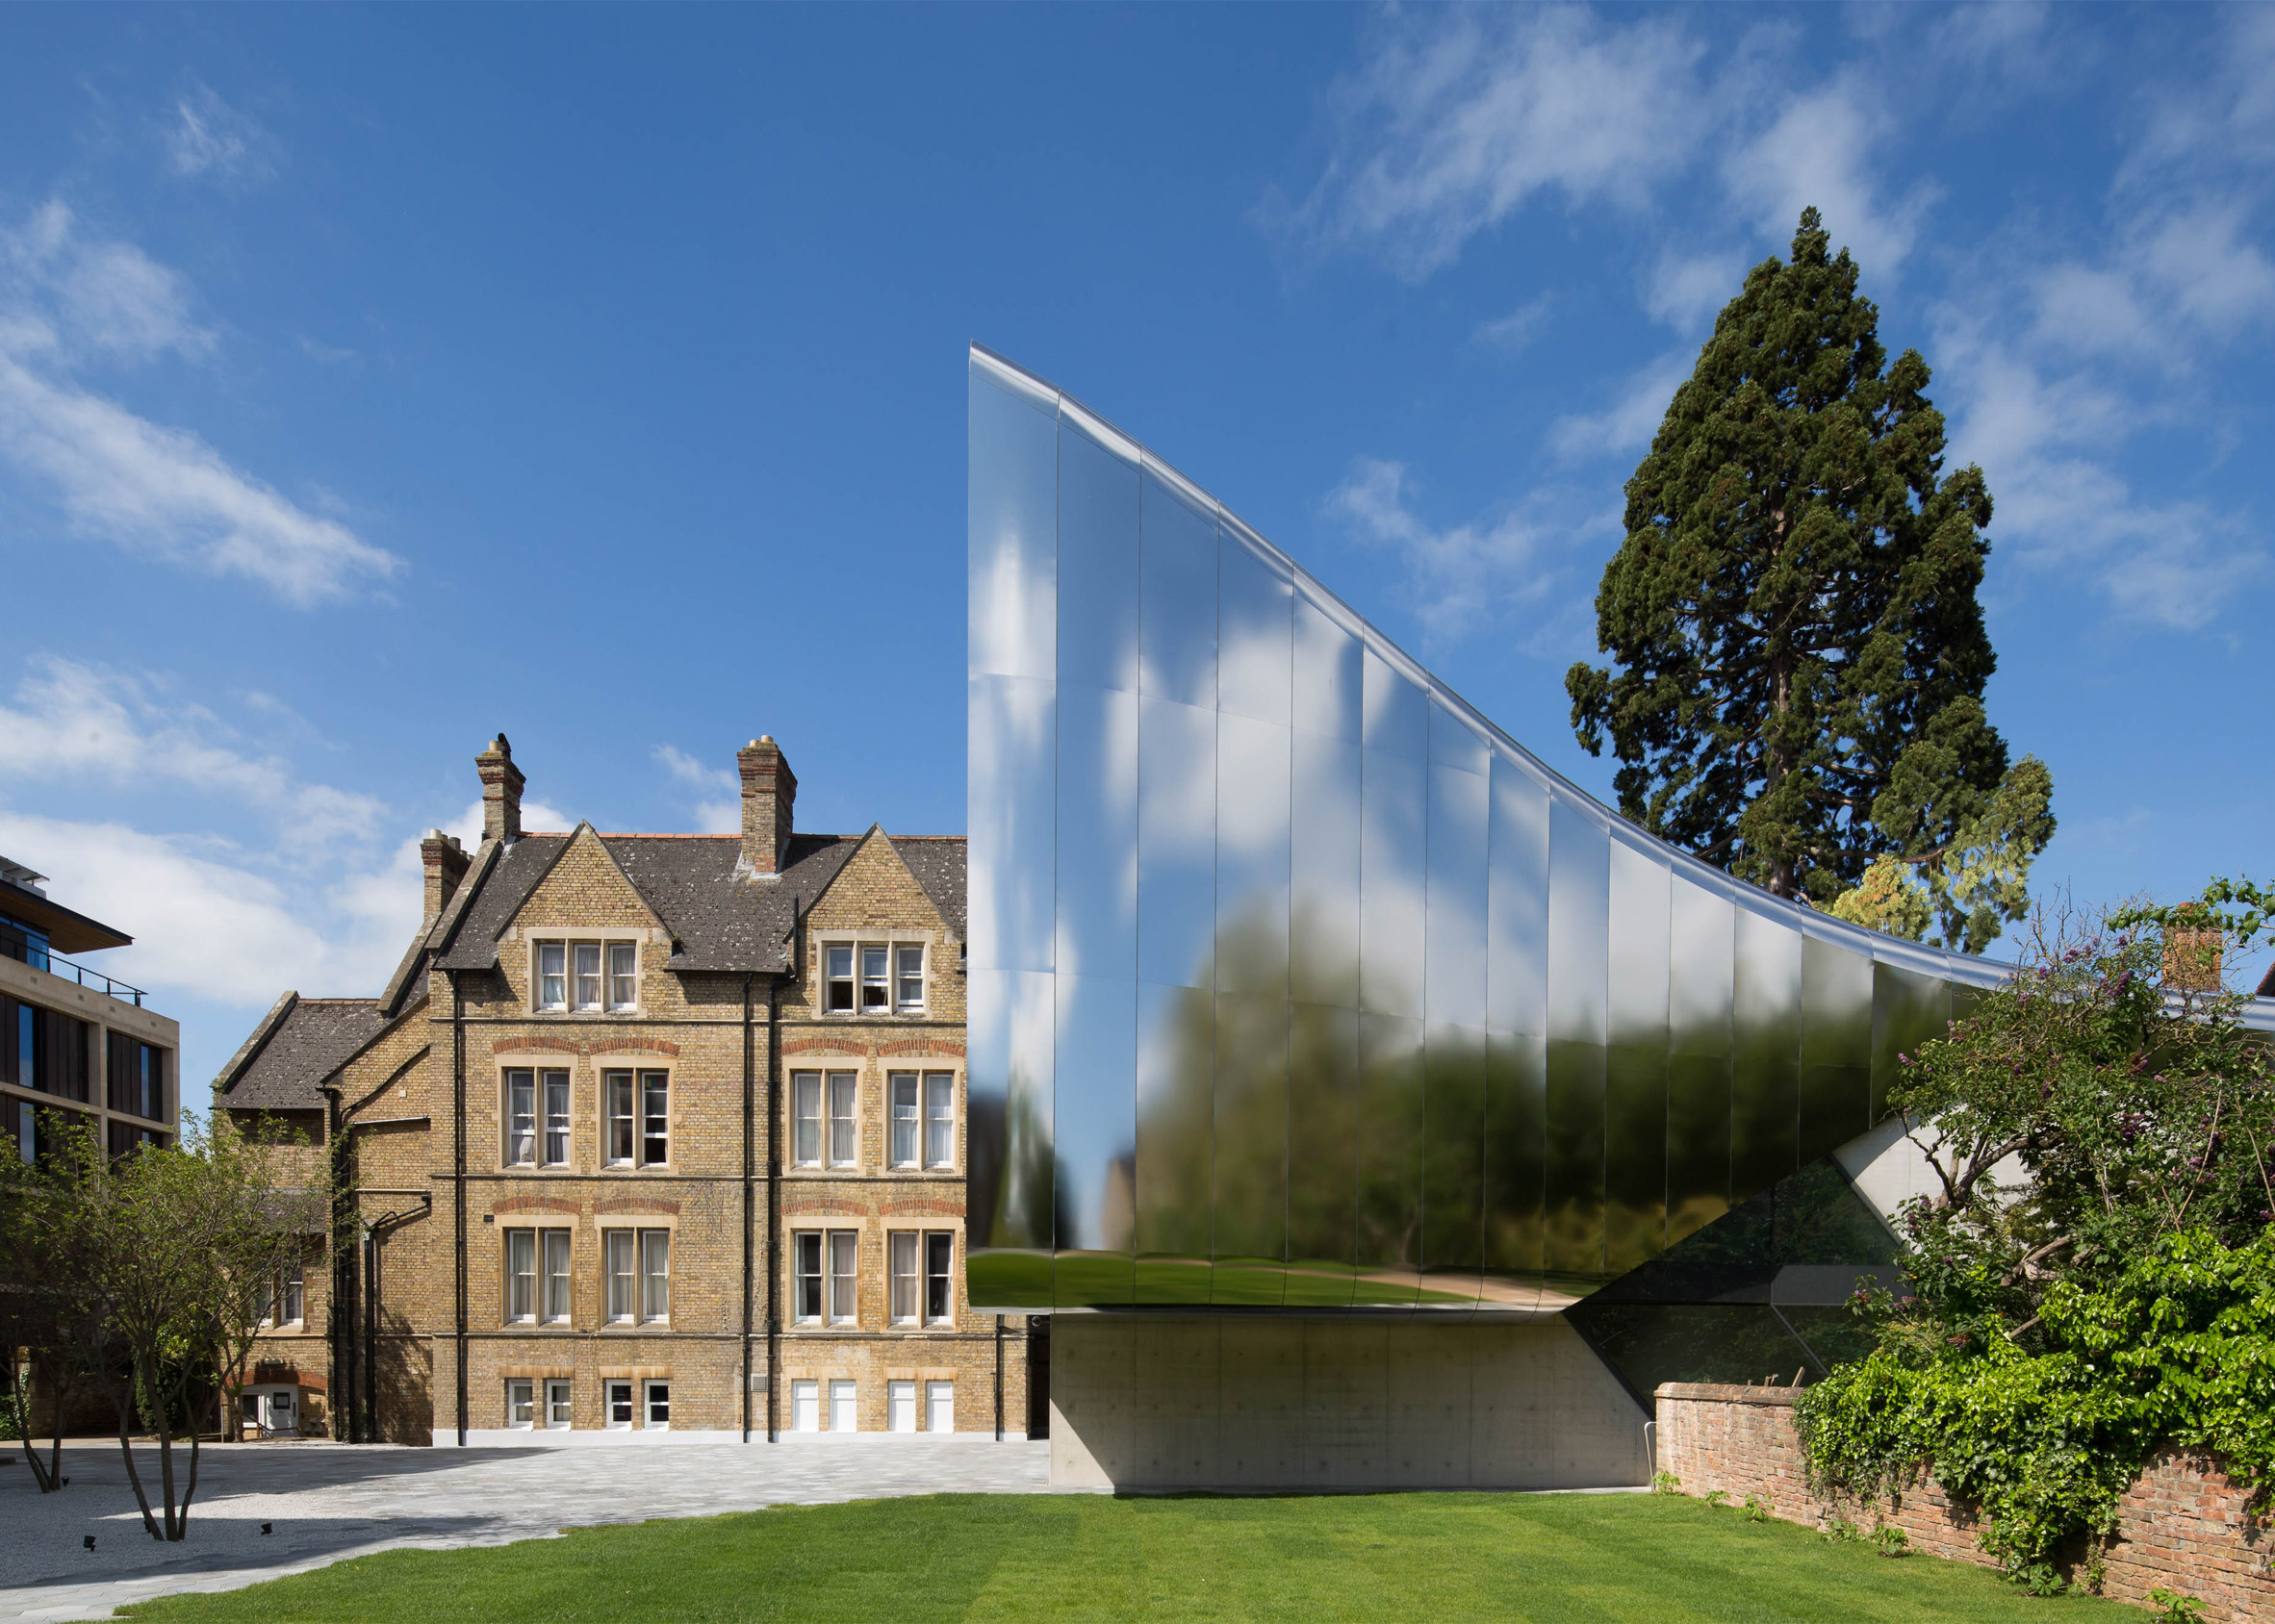 higher-educationr-research-investcorp-building-oxford-university-middle-ast-centre-st-antony-college-oxford-united-kingdom-zaha-hadid-architects-world-architecture-festival_dezeen_2364_ss_0